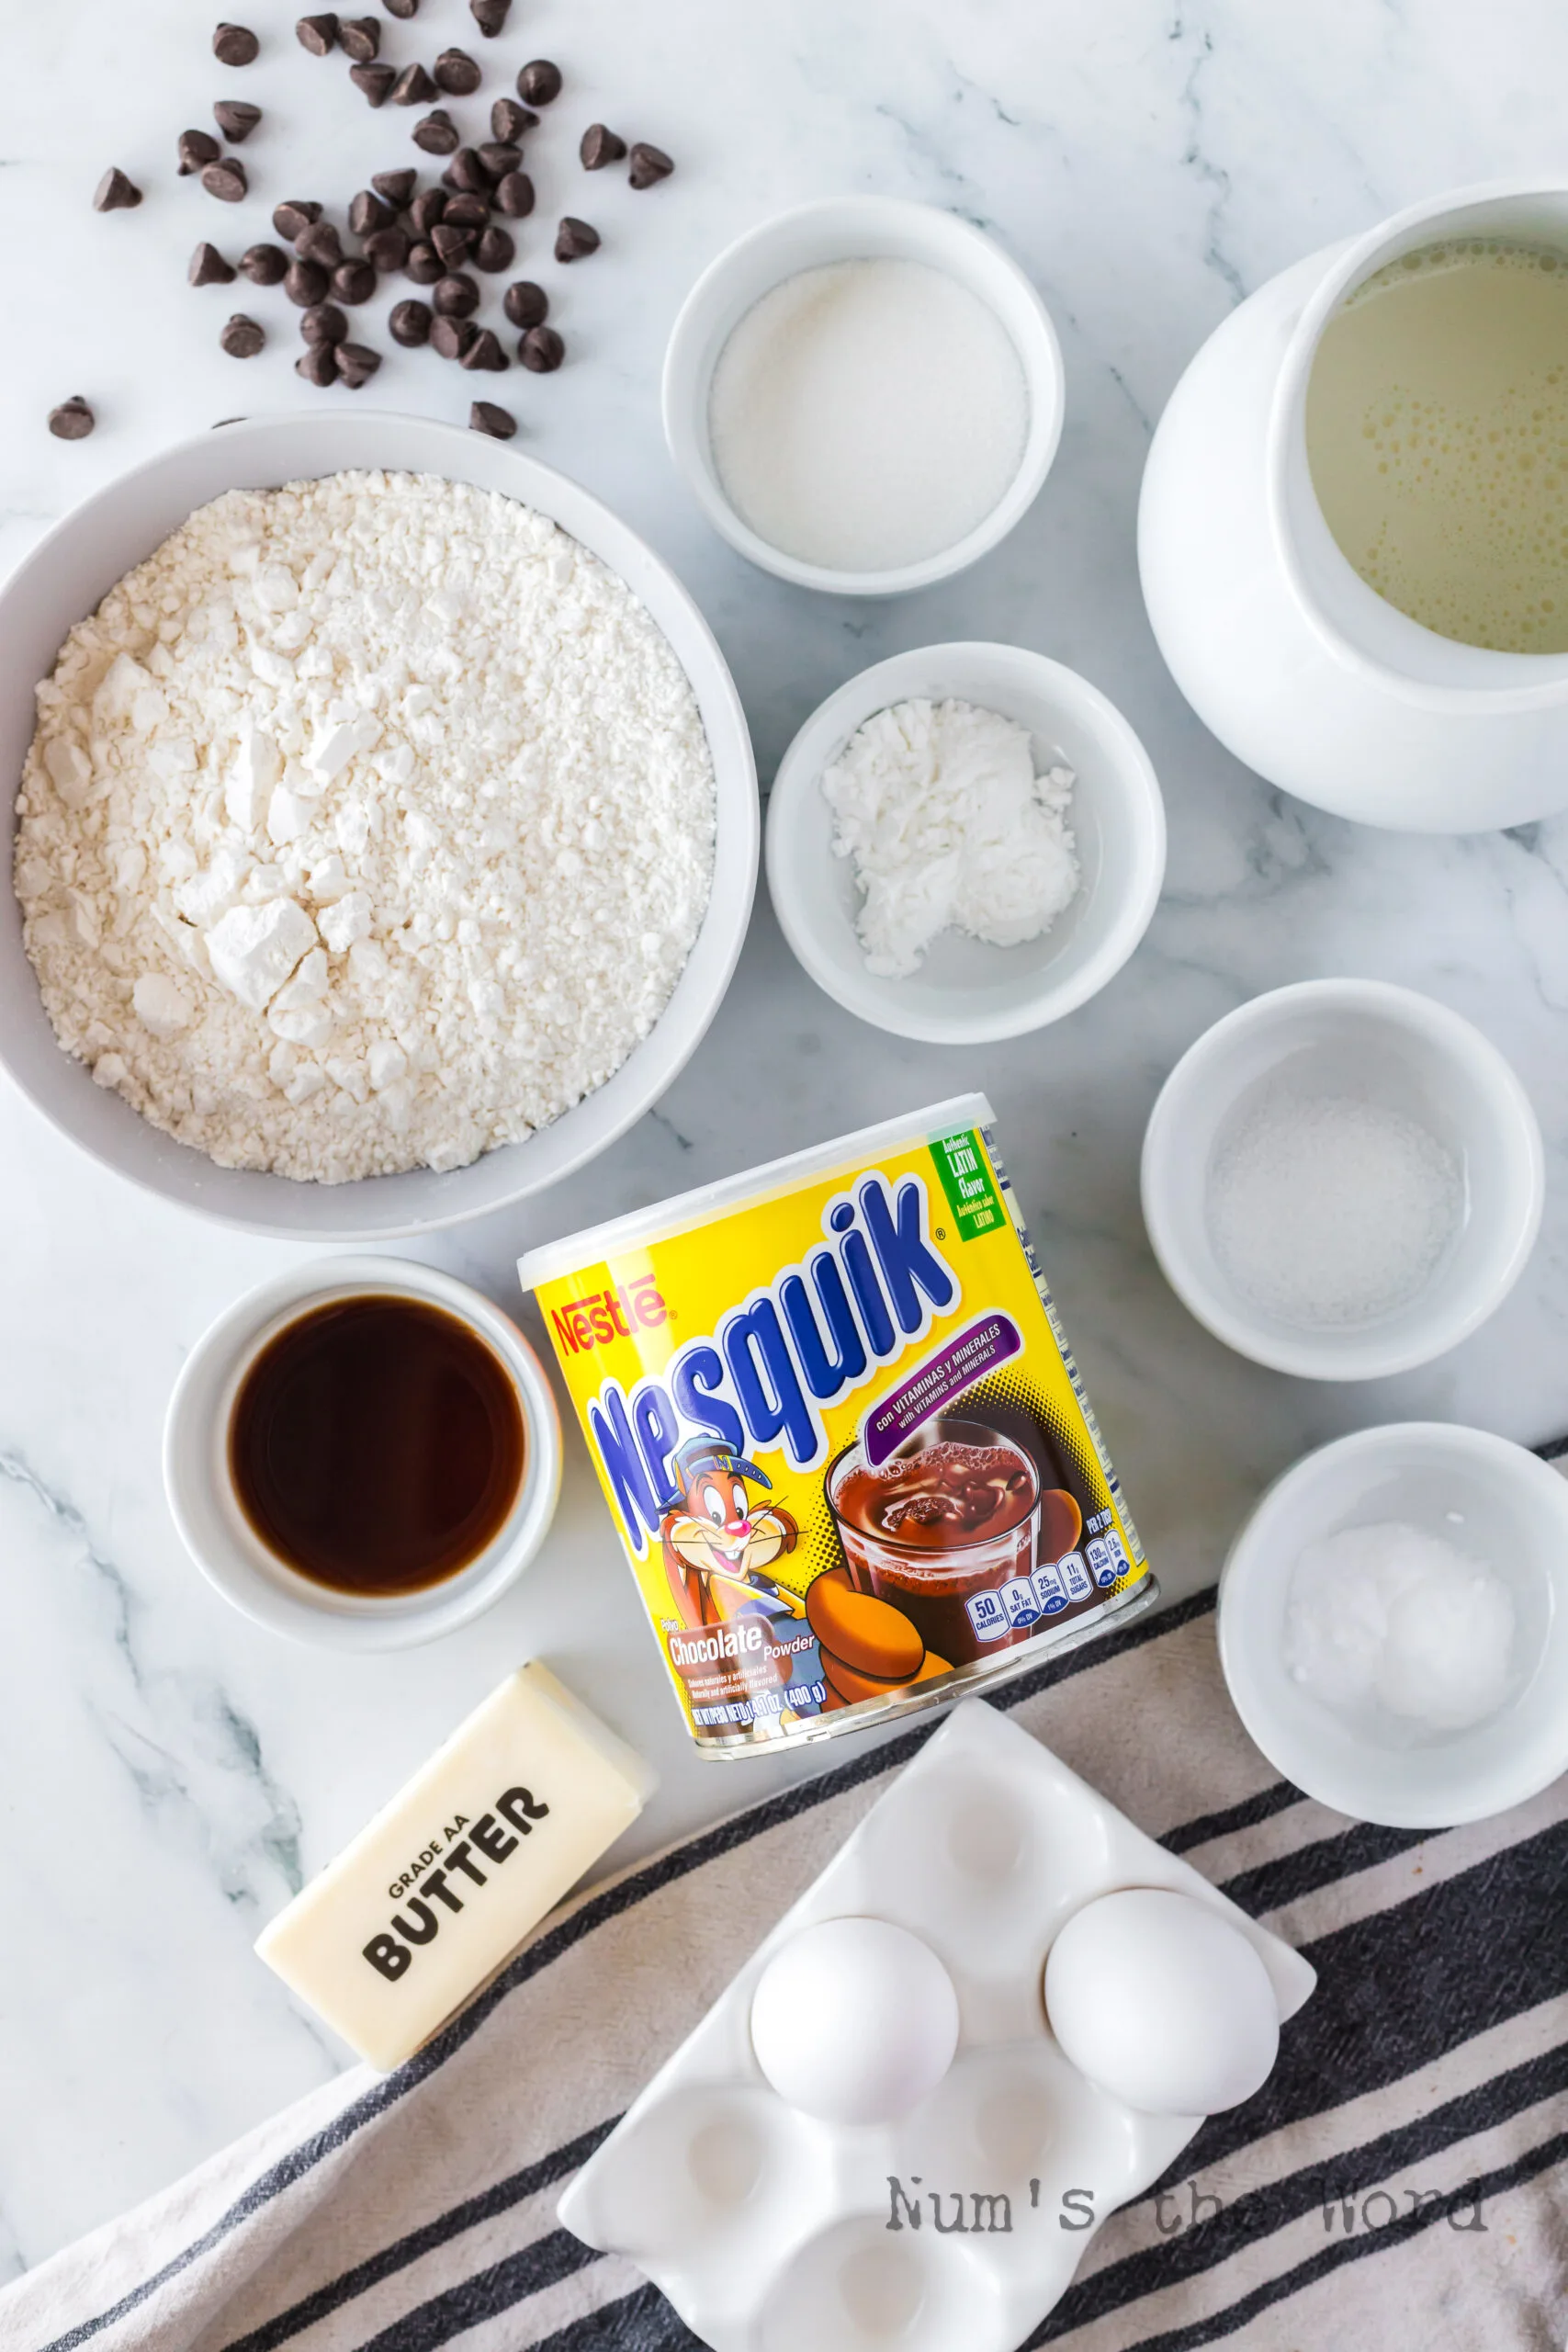 All ingredients for Nesquik Pancakes laid out on counter